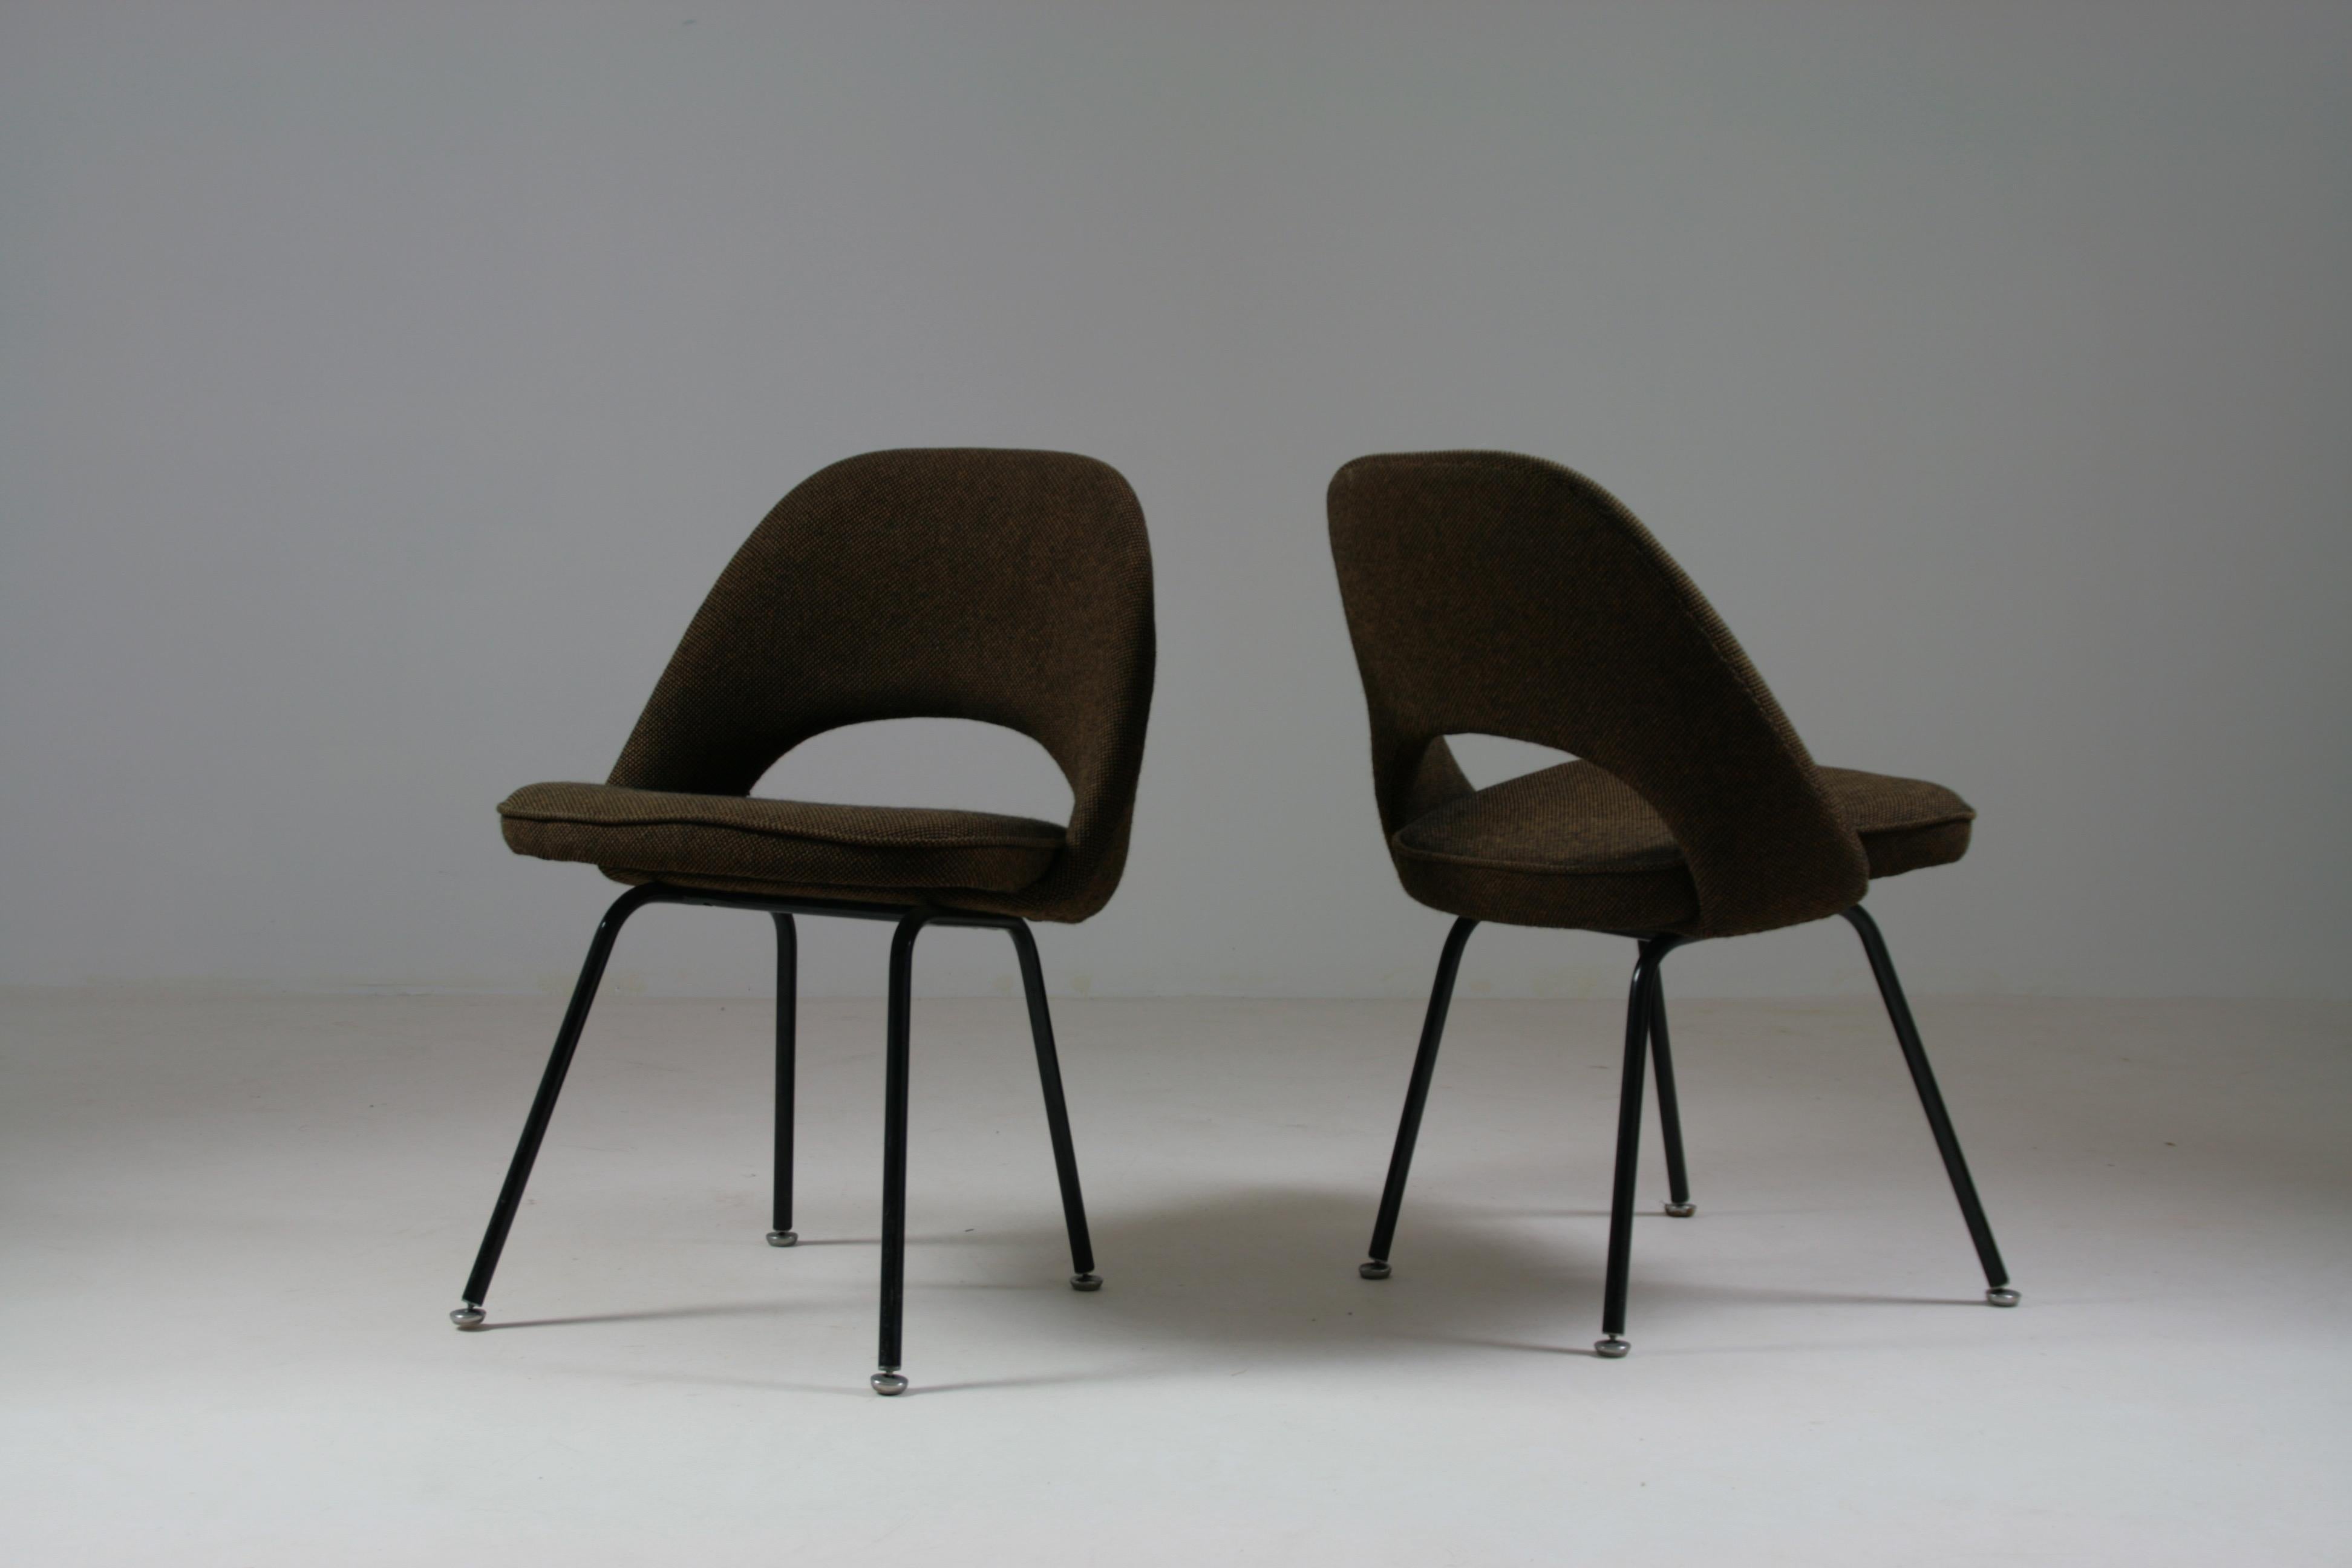 20th Century Pair of Conference Chairs by Eero Saarinen, Knoll International, 1960 For Sale